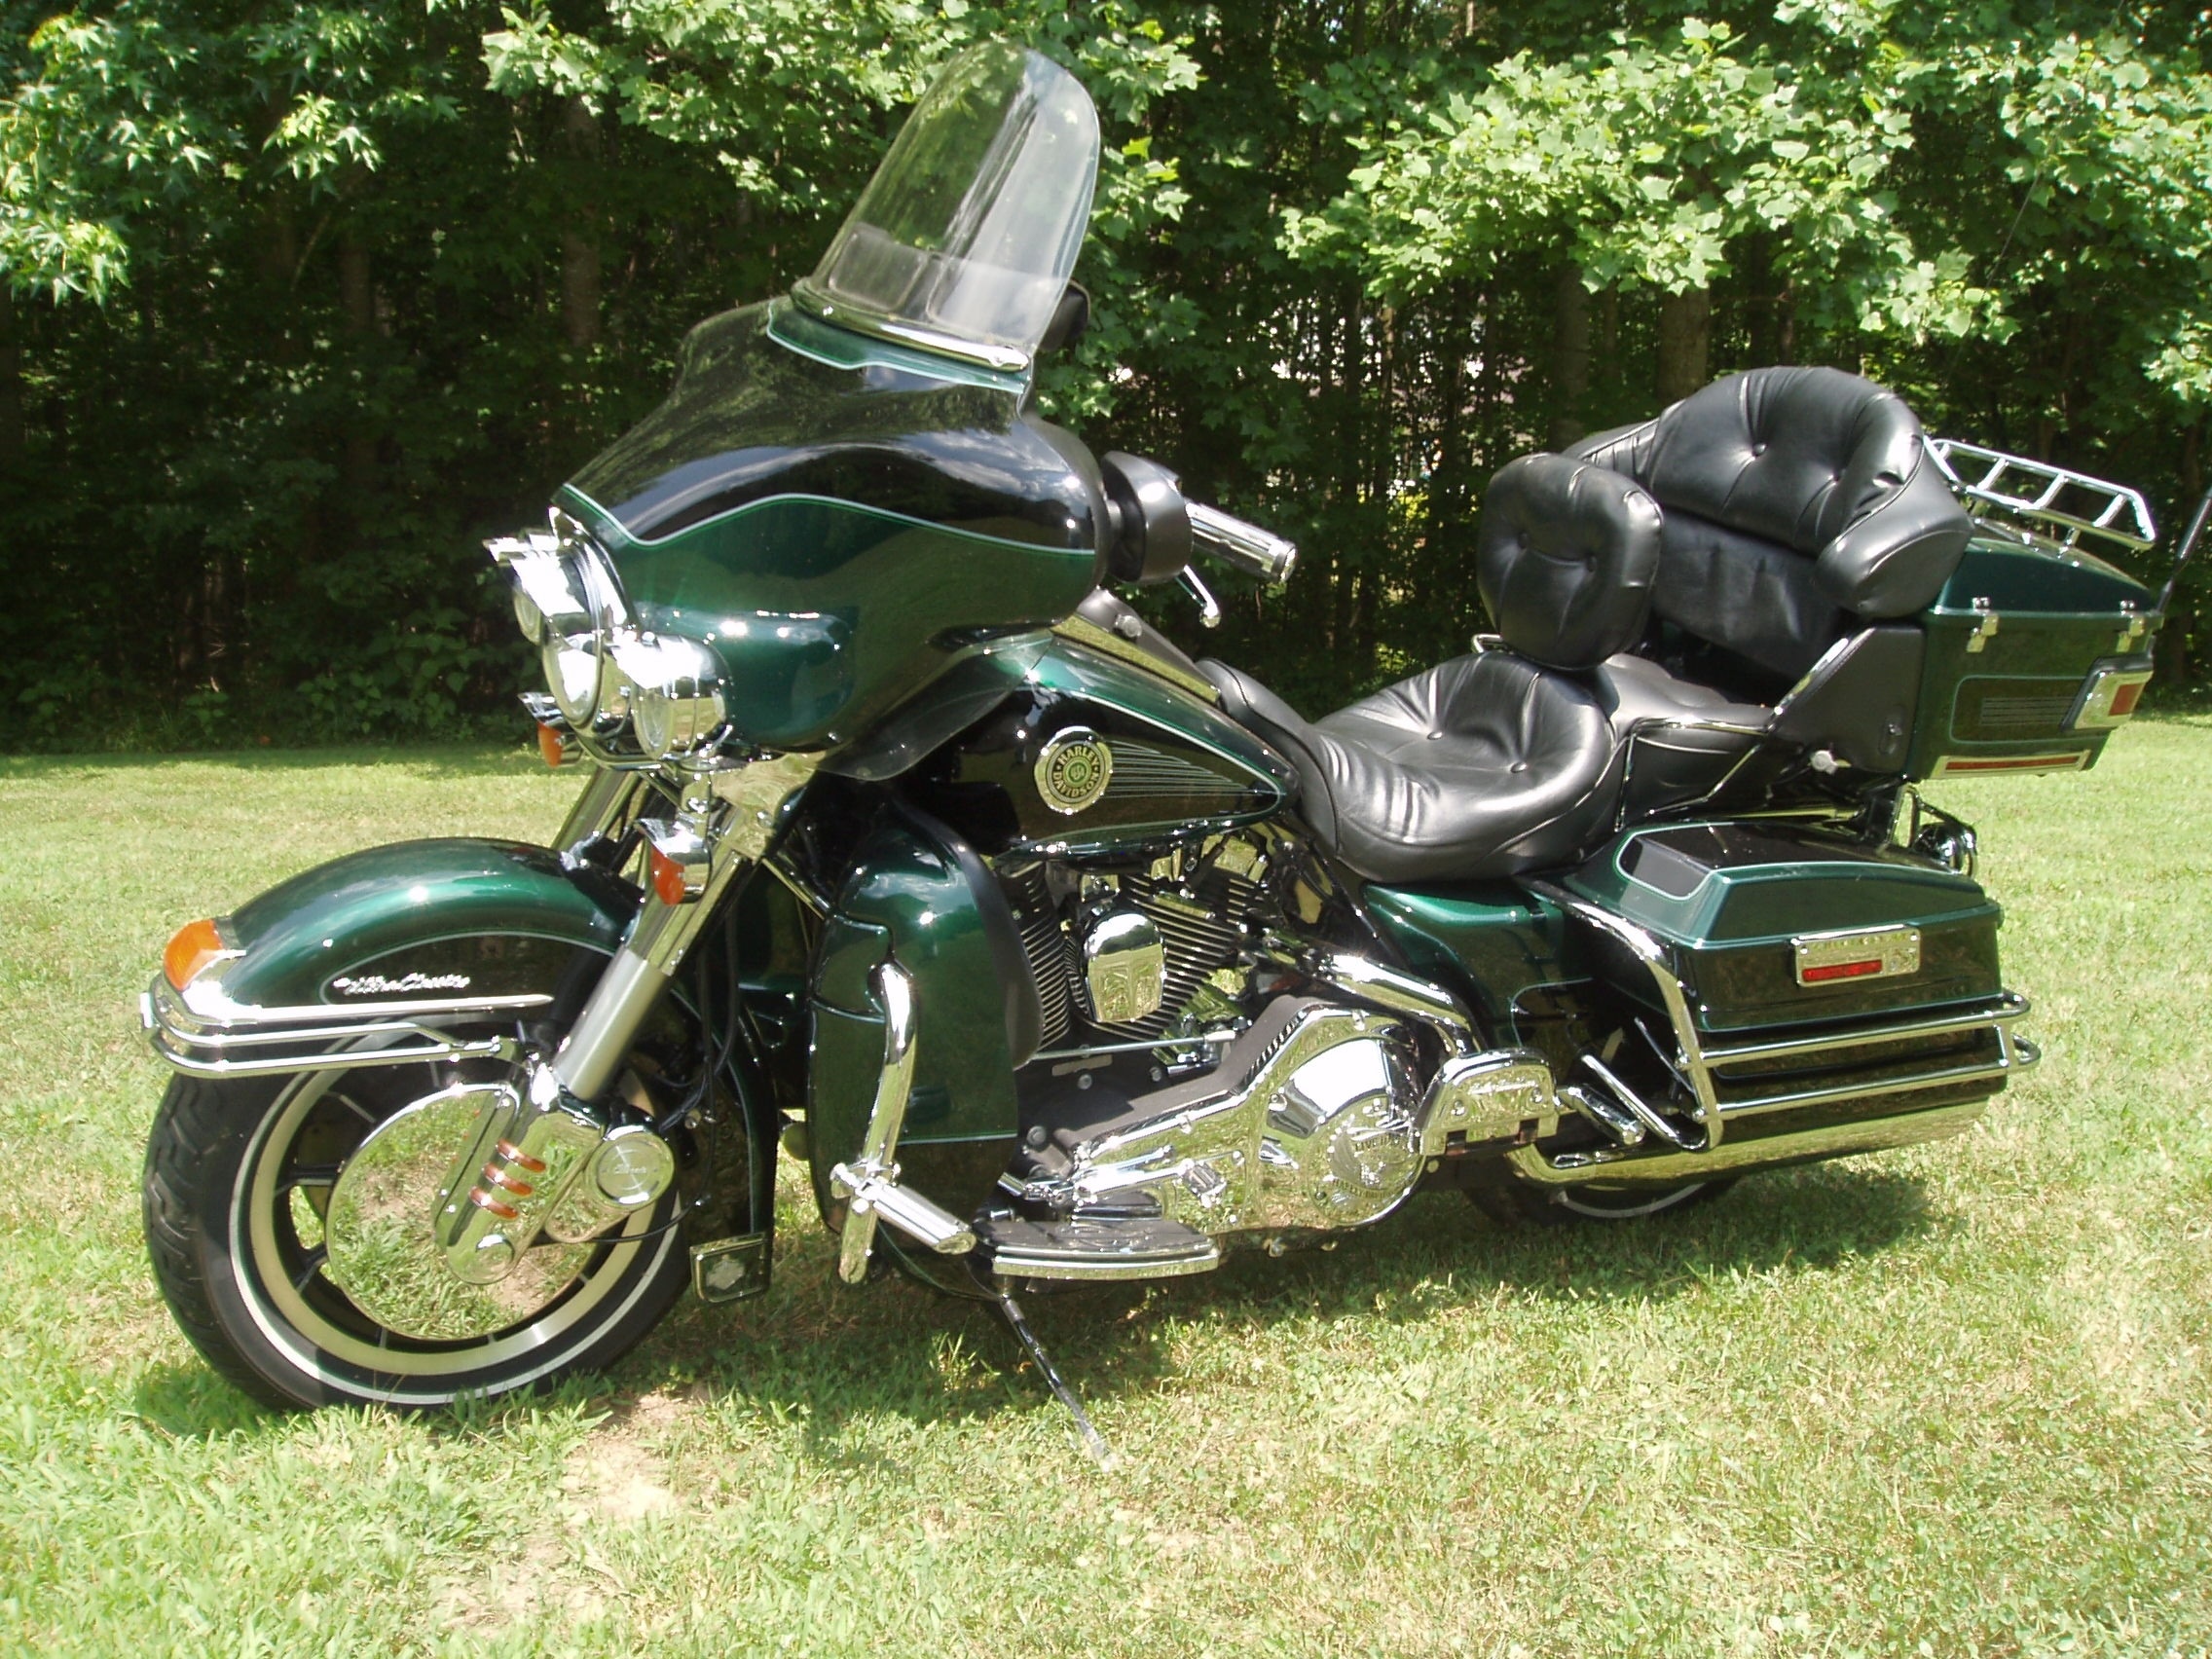 green and black touring motorcycle